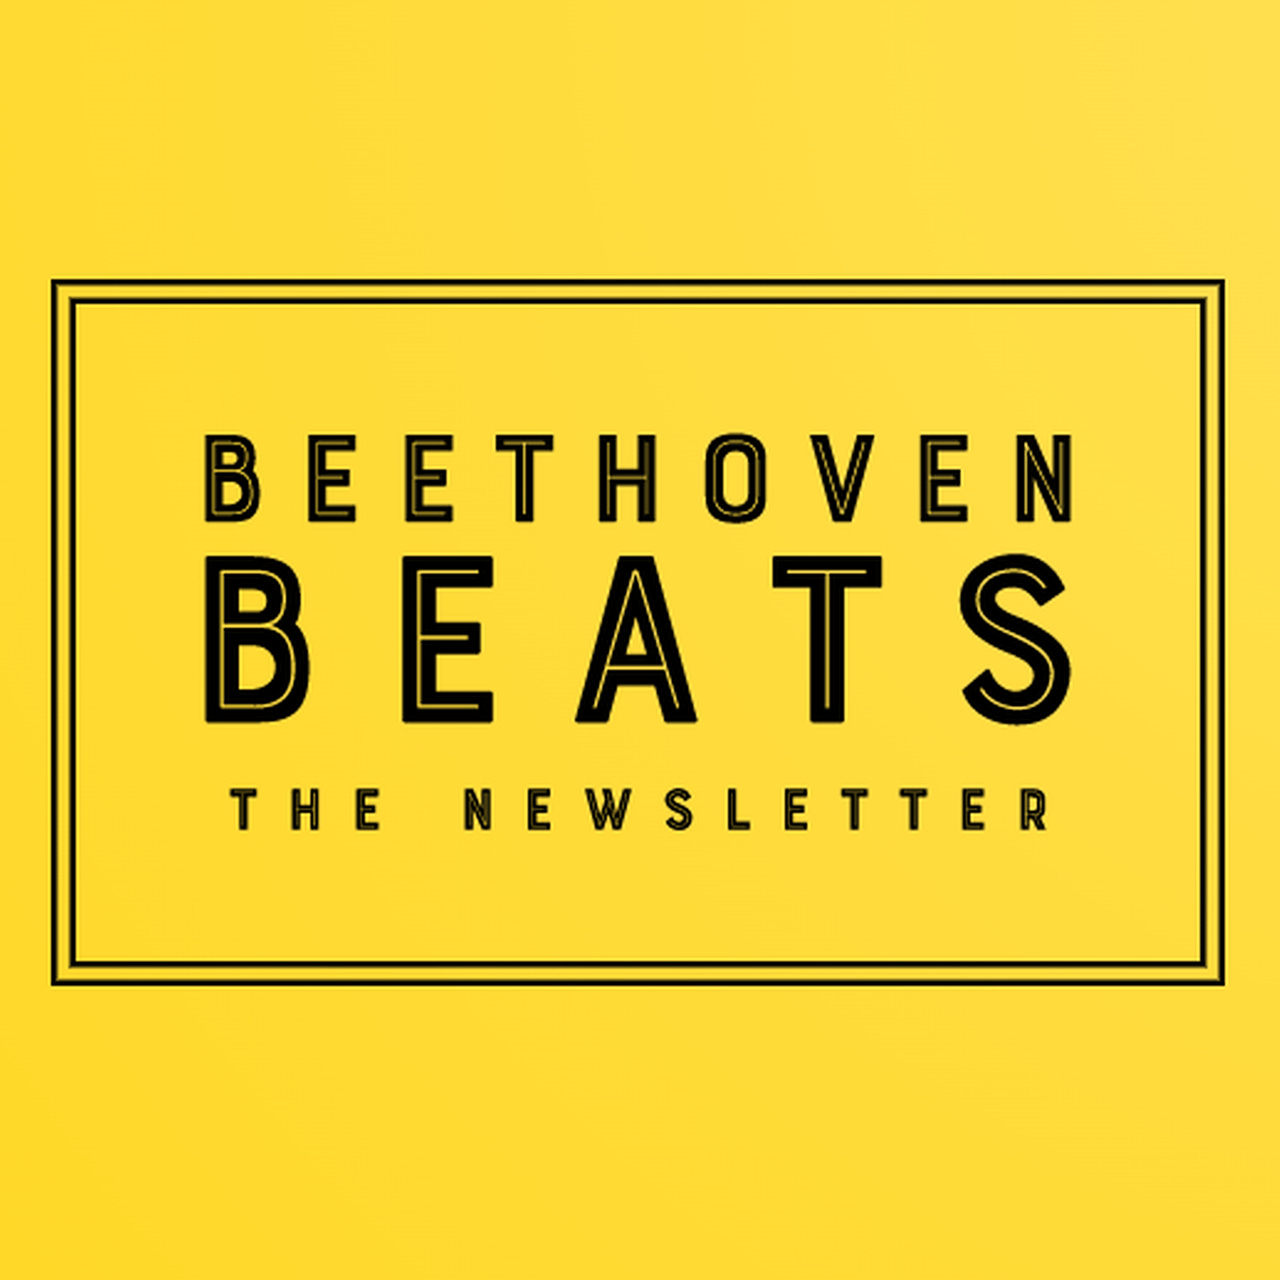 Artwork for Beethoven Beats